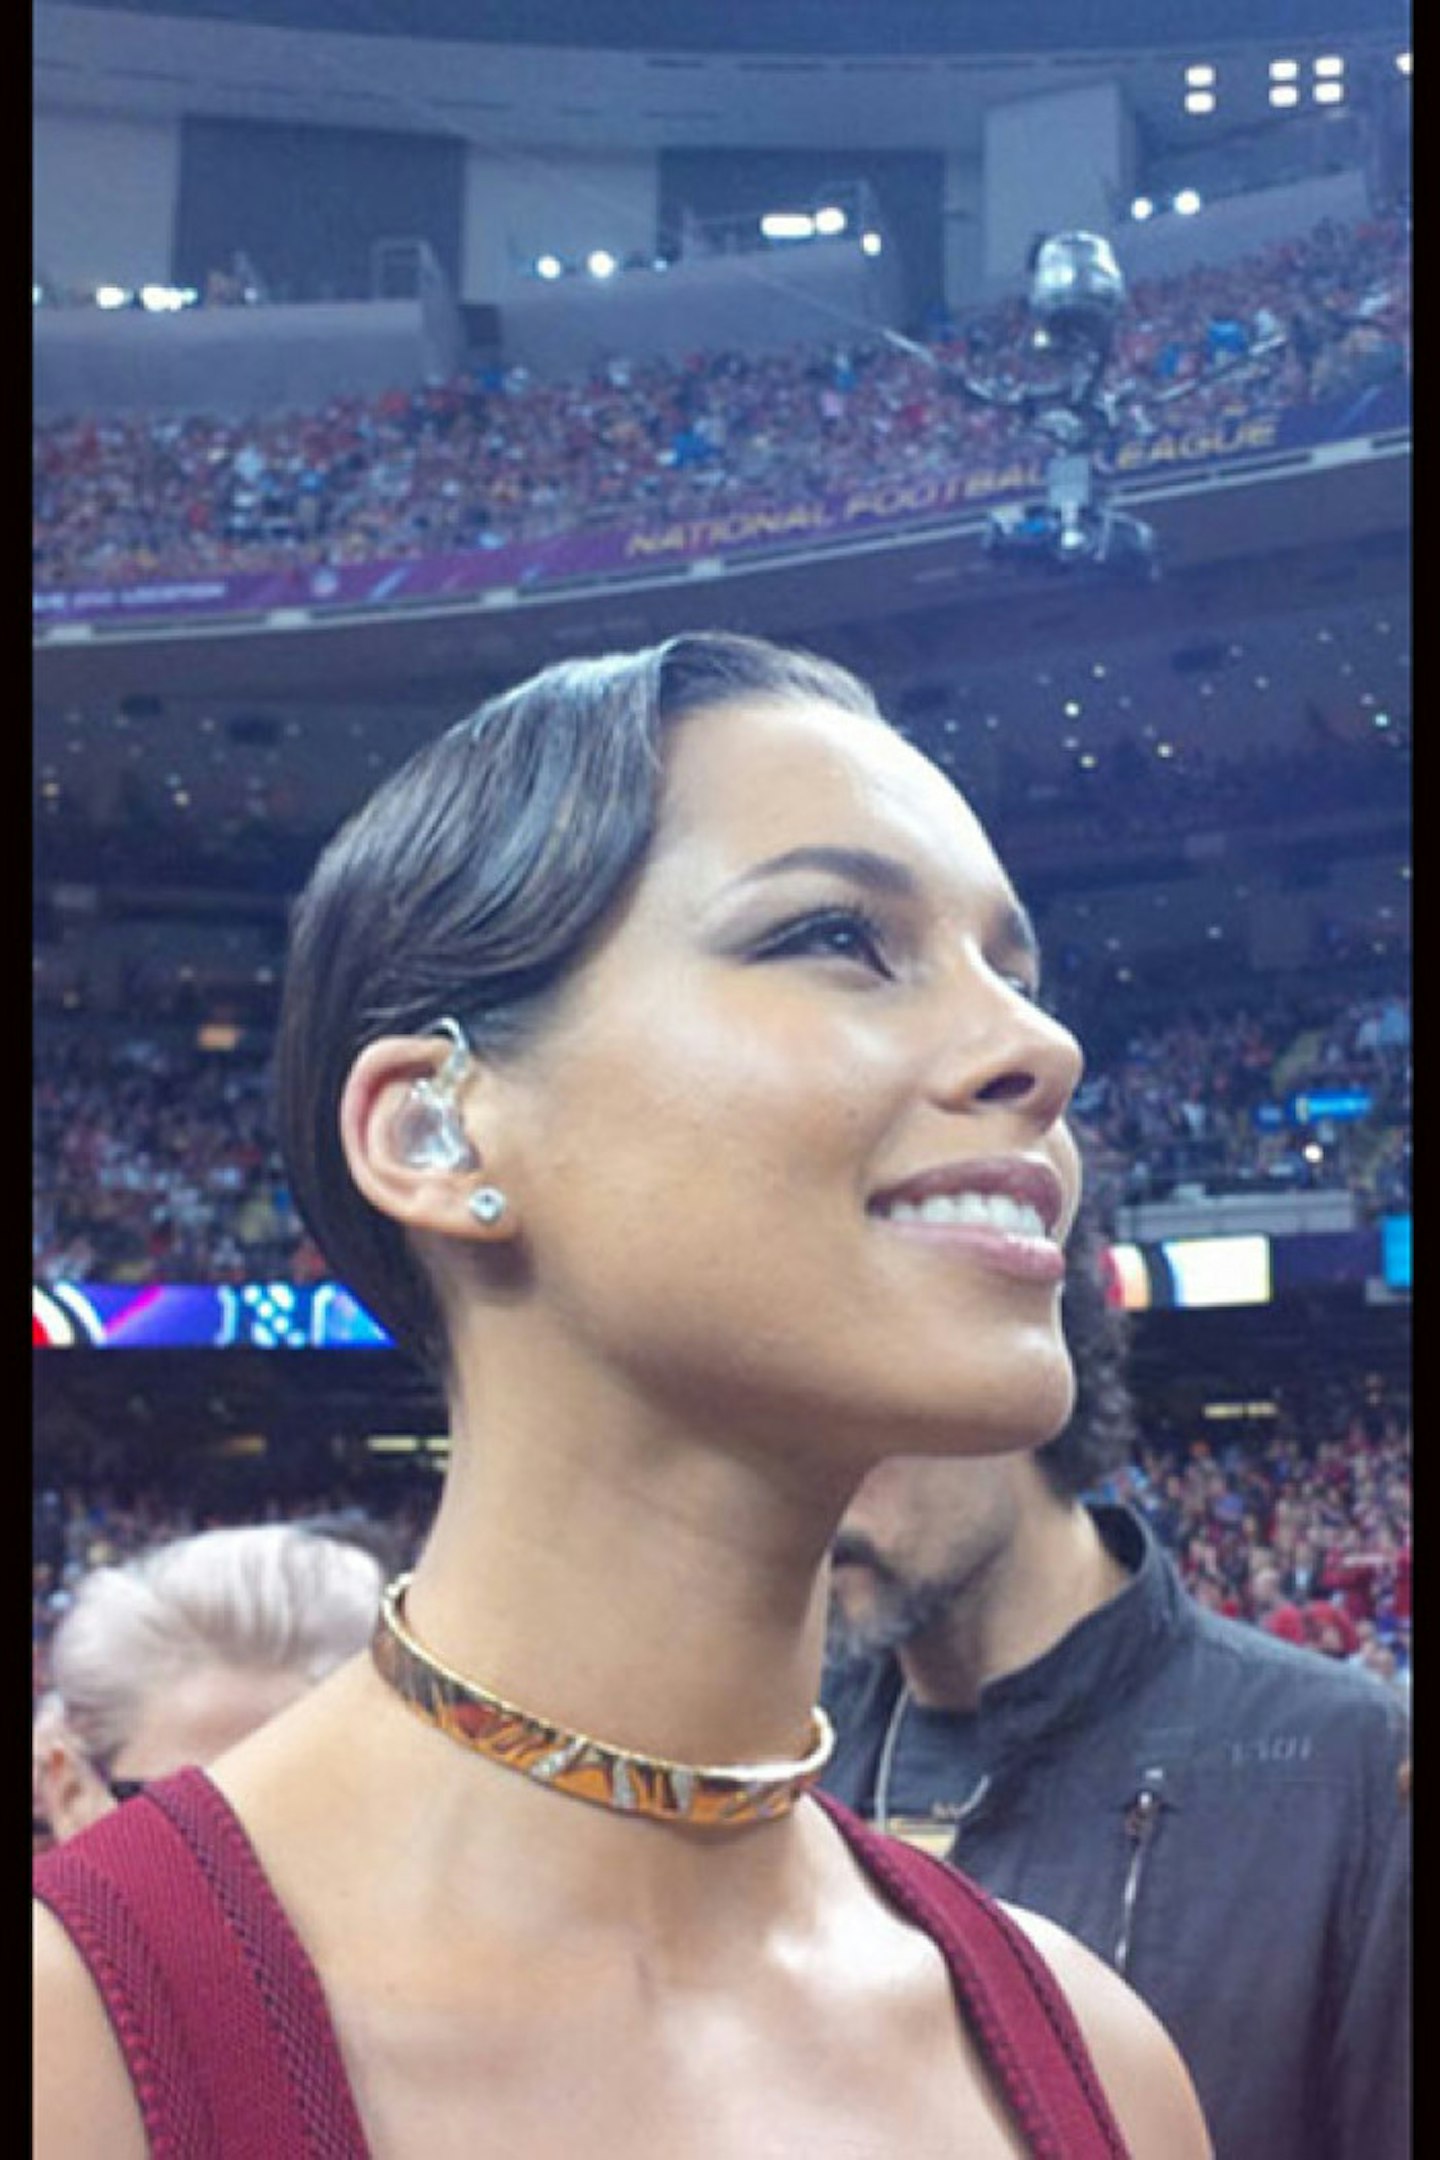 Alicia Keys: I was speechless in this pic! Blessed to be here in Louisiana showing love for the USA.